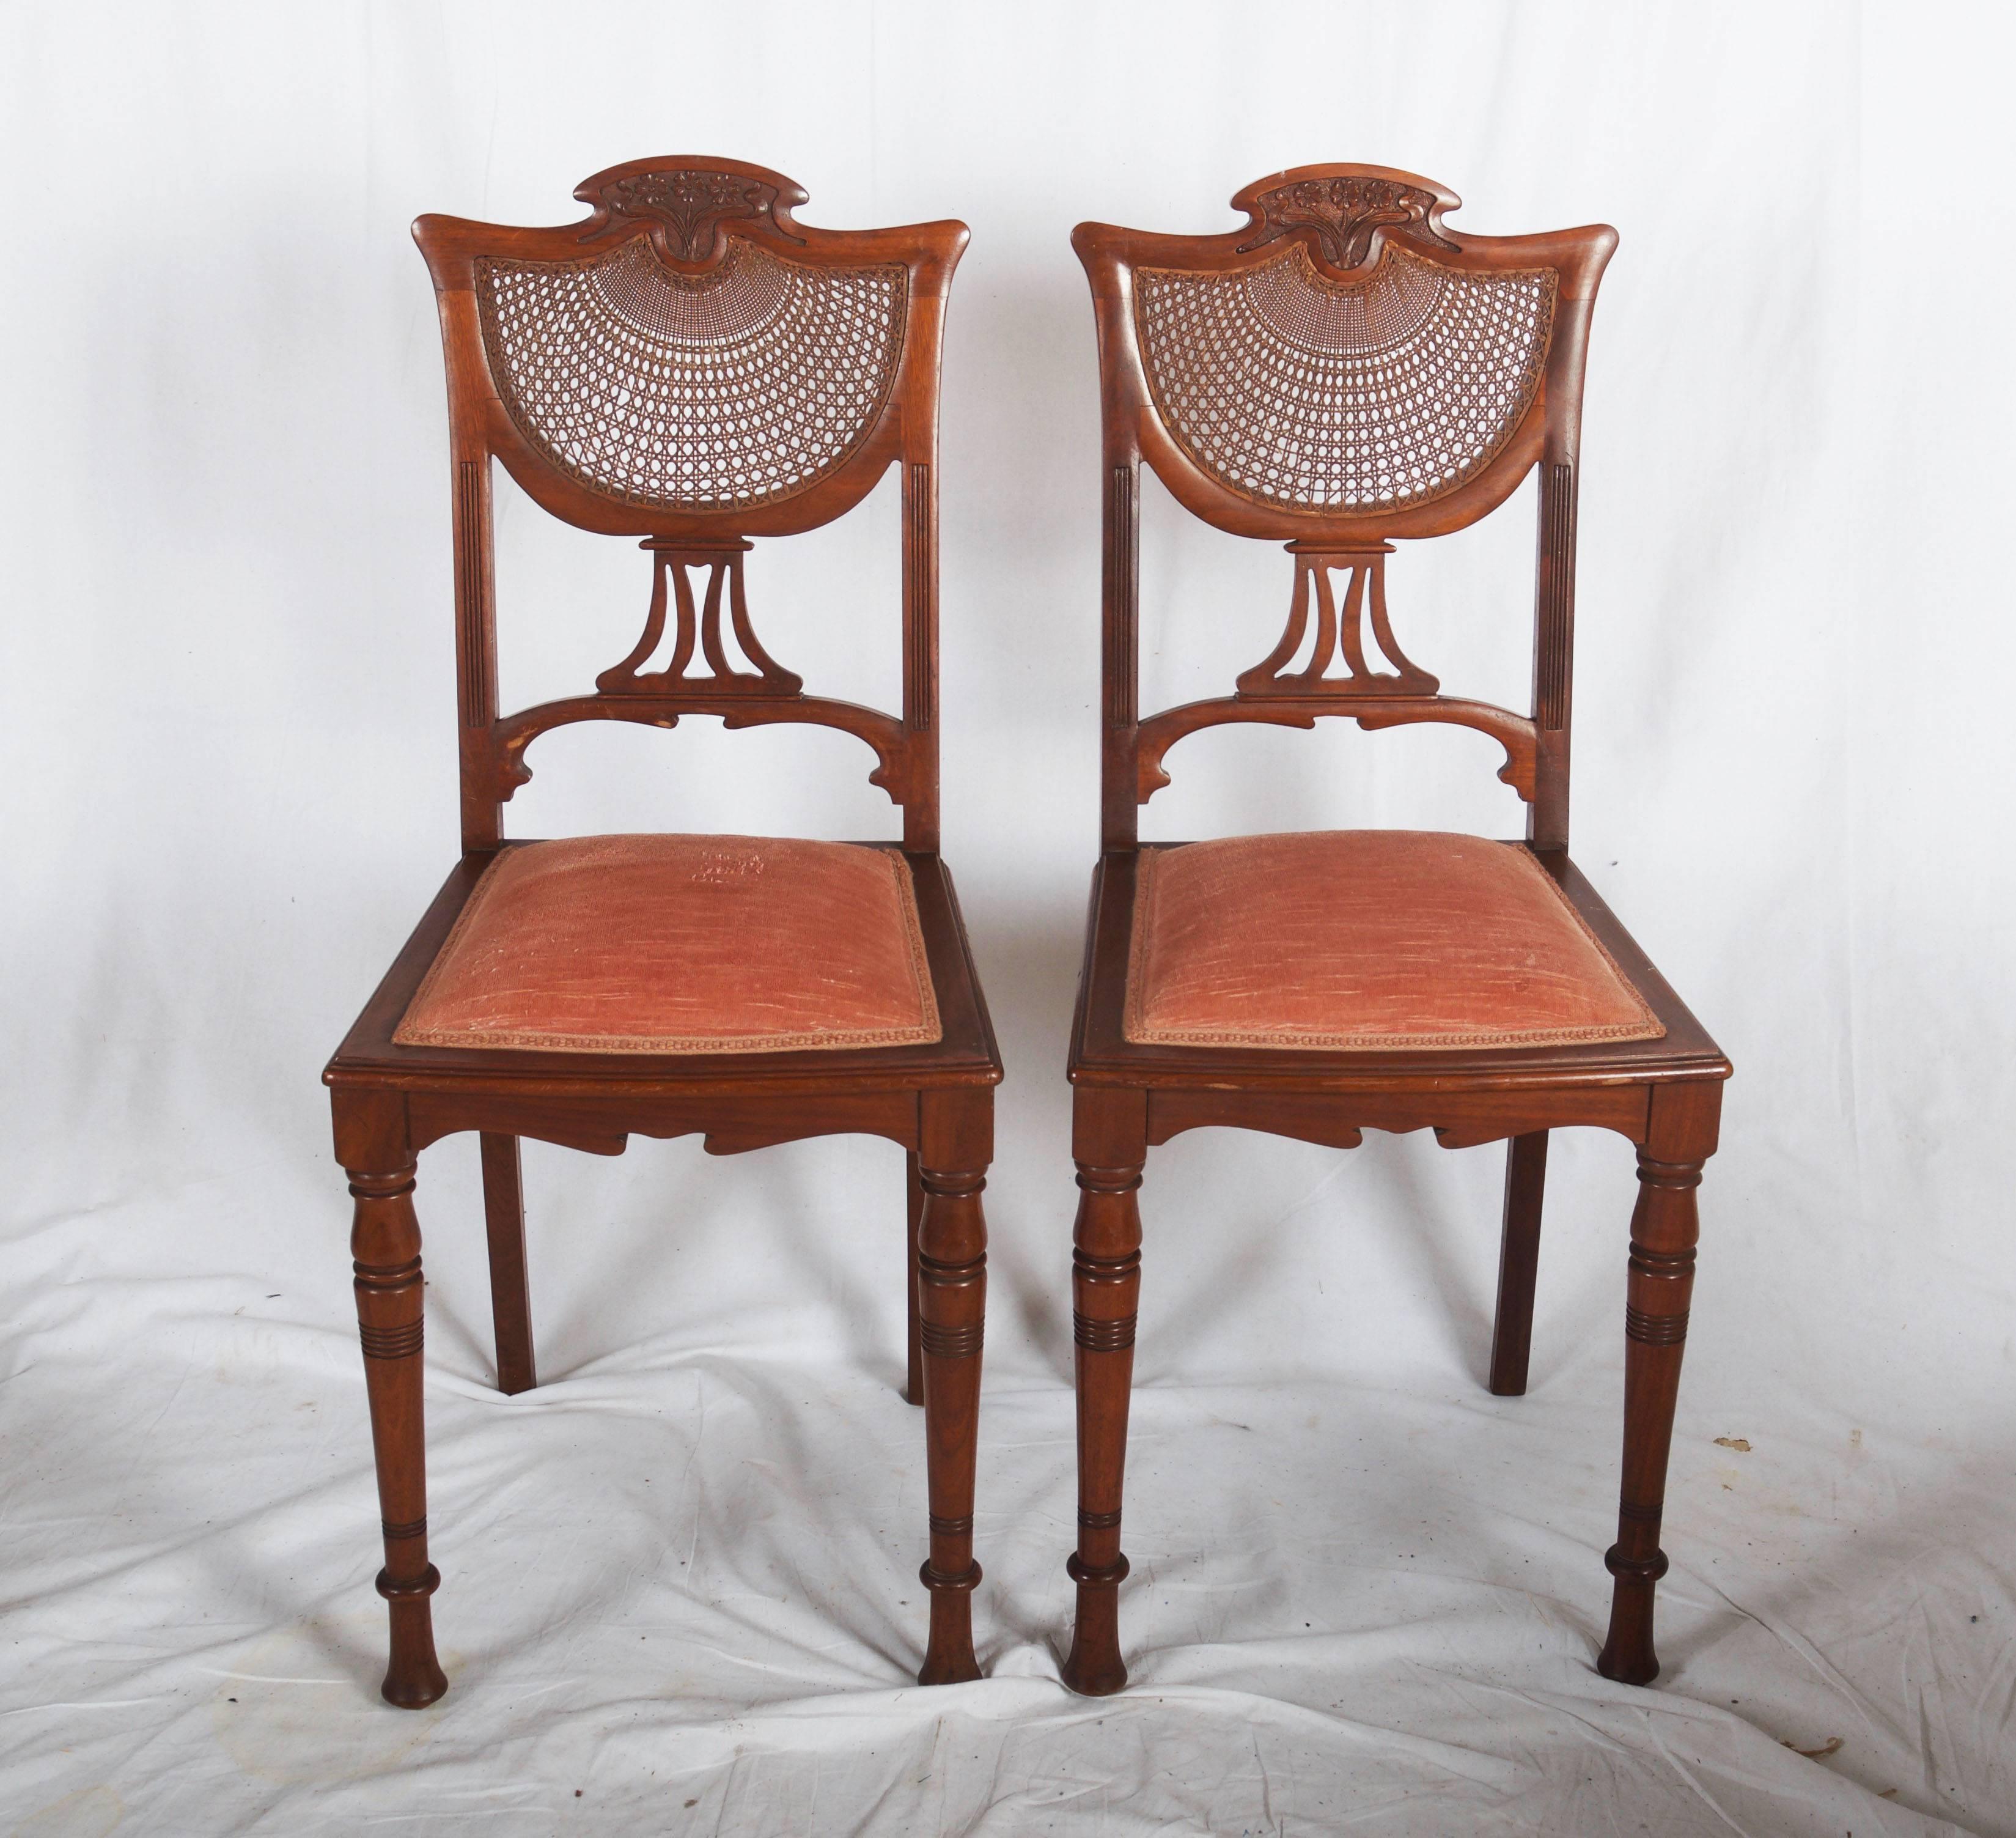 Early 20th Century French Art Nouveau Walnut Side Chairs